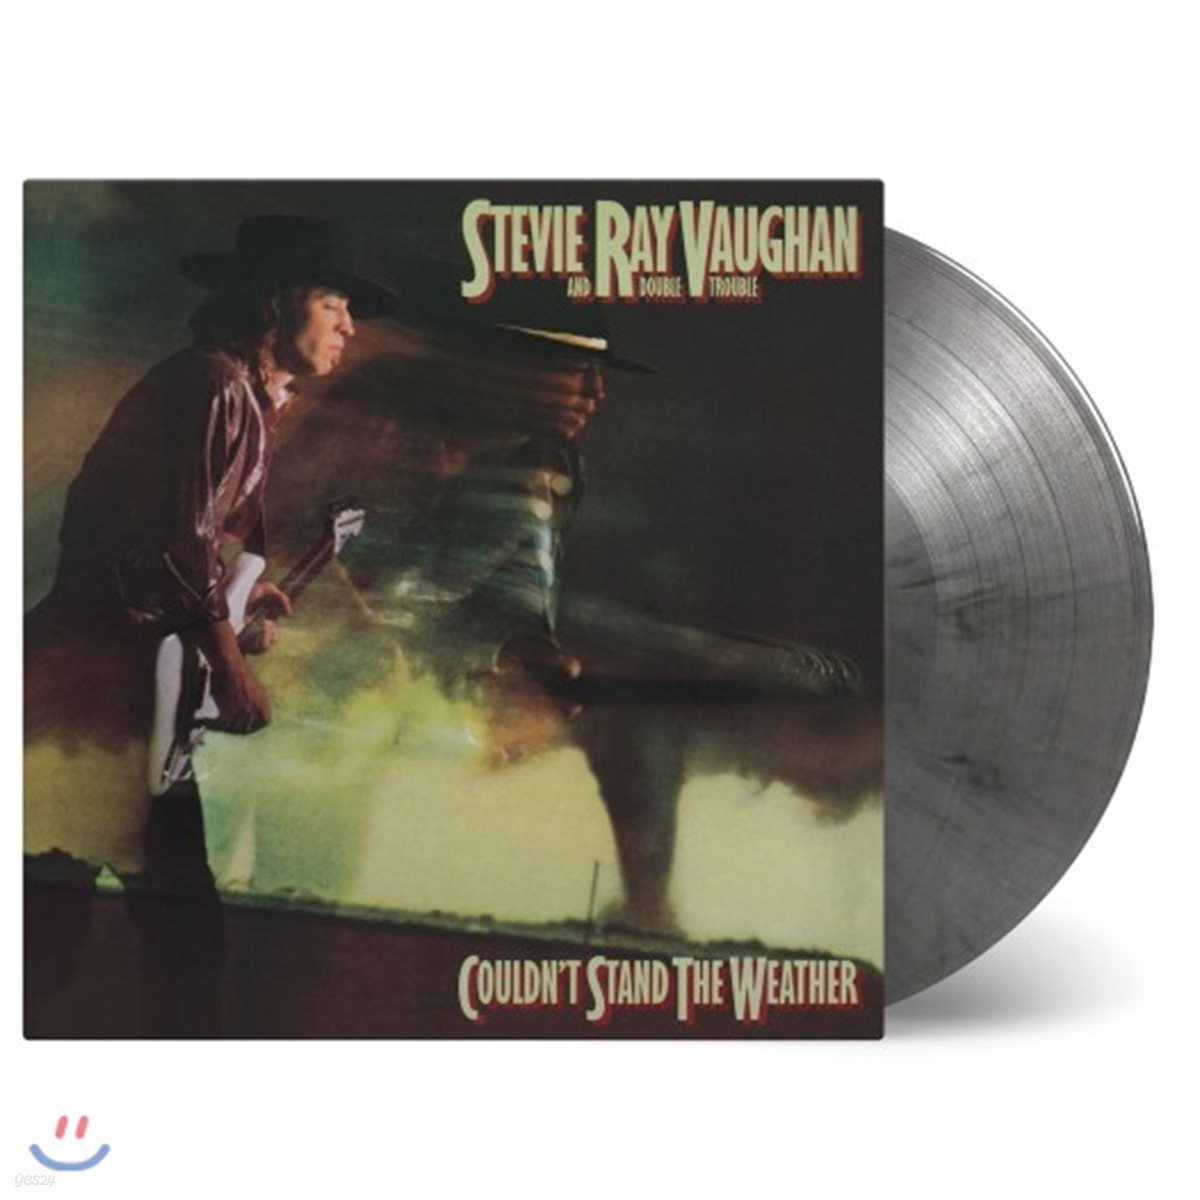 Stevie Ray Vaughan - Couldn't Stand the weather 스티브 레이본 정규 2집 [그레이 & 블랙 컬러 2LP]